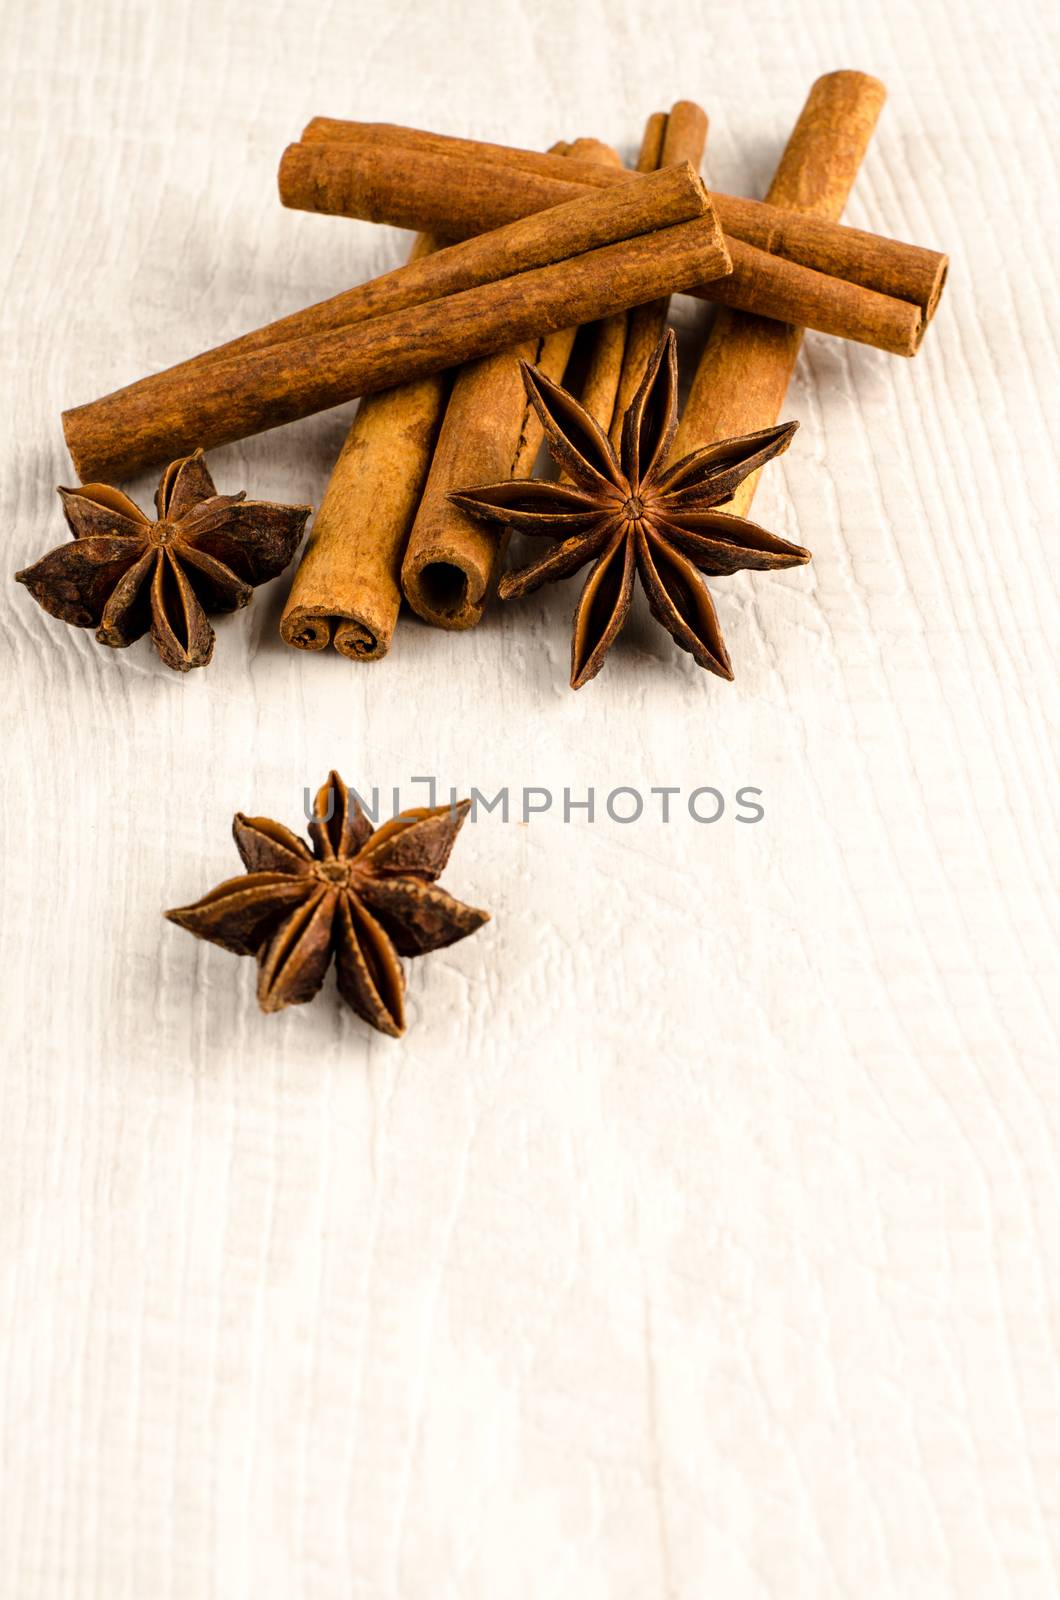 Cinnamon and anise by AnaMarques